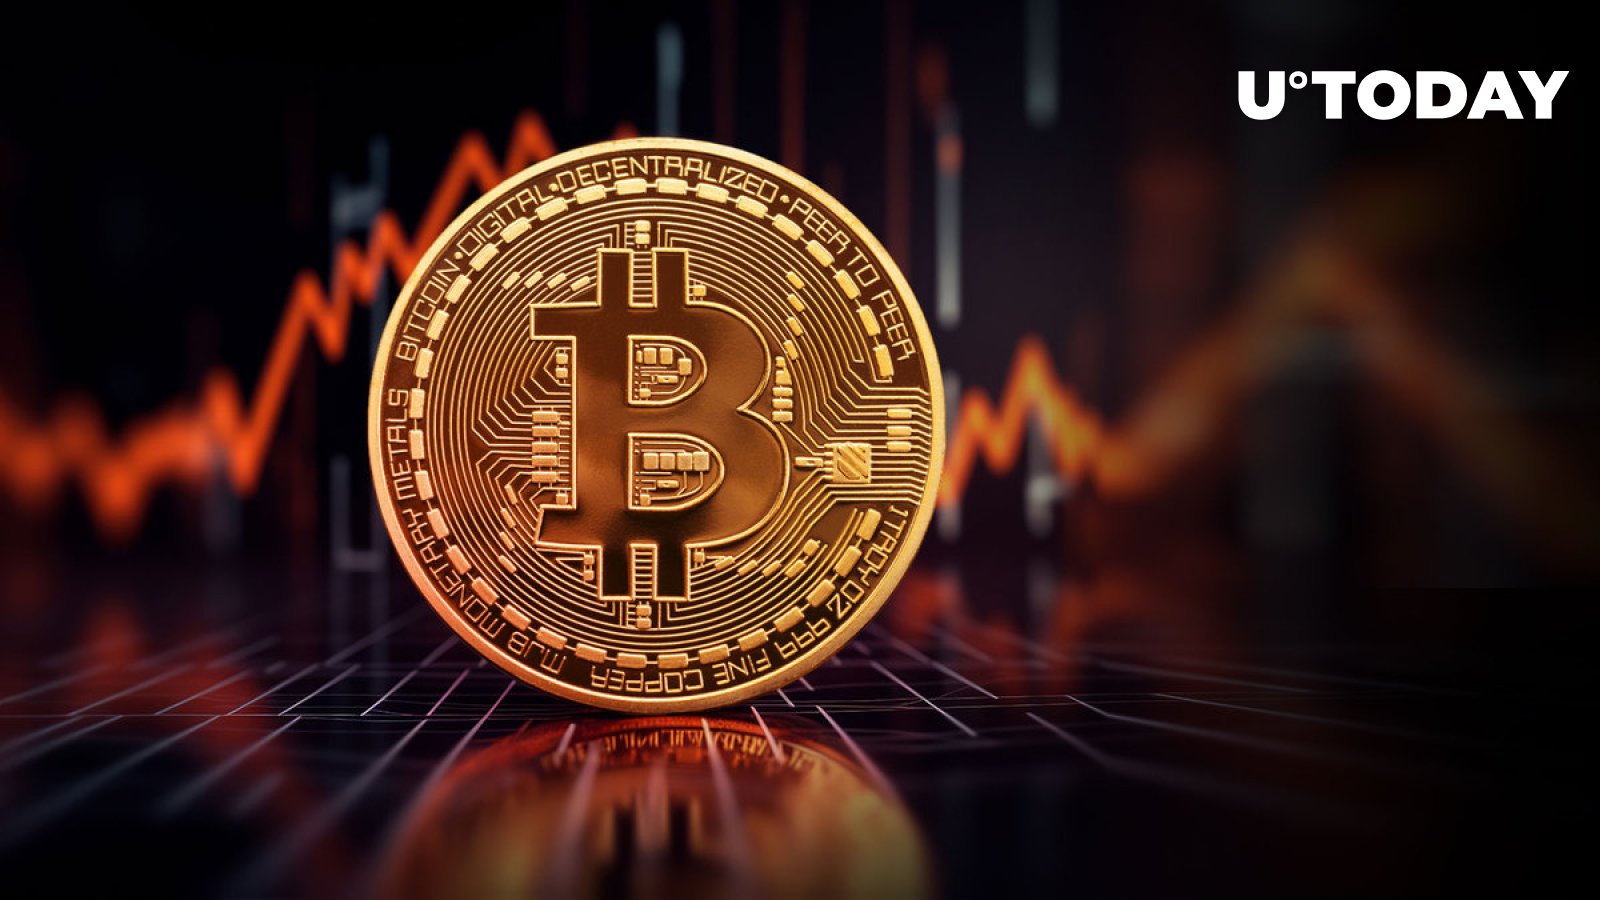 Bitcoin (BTC) Halving Might Bring Suffering in Short Term, Analyst Charles Edwards Says